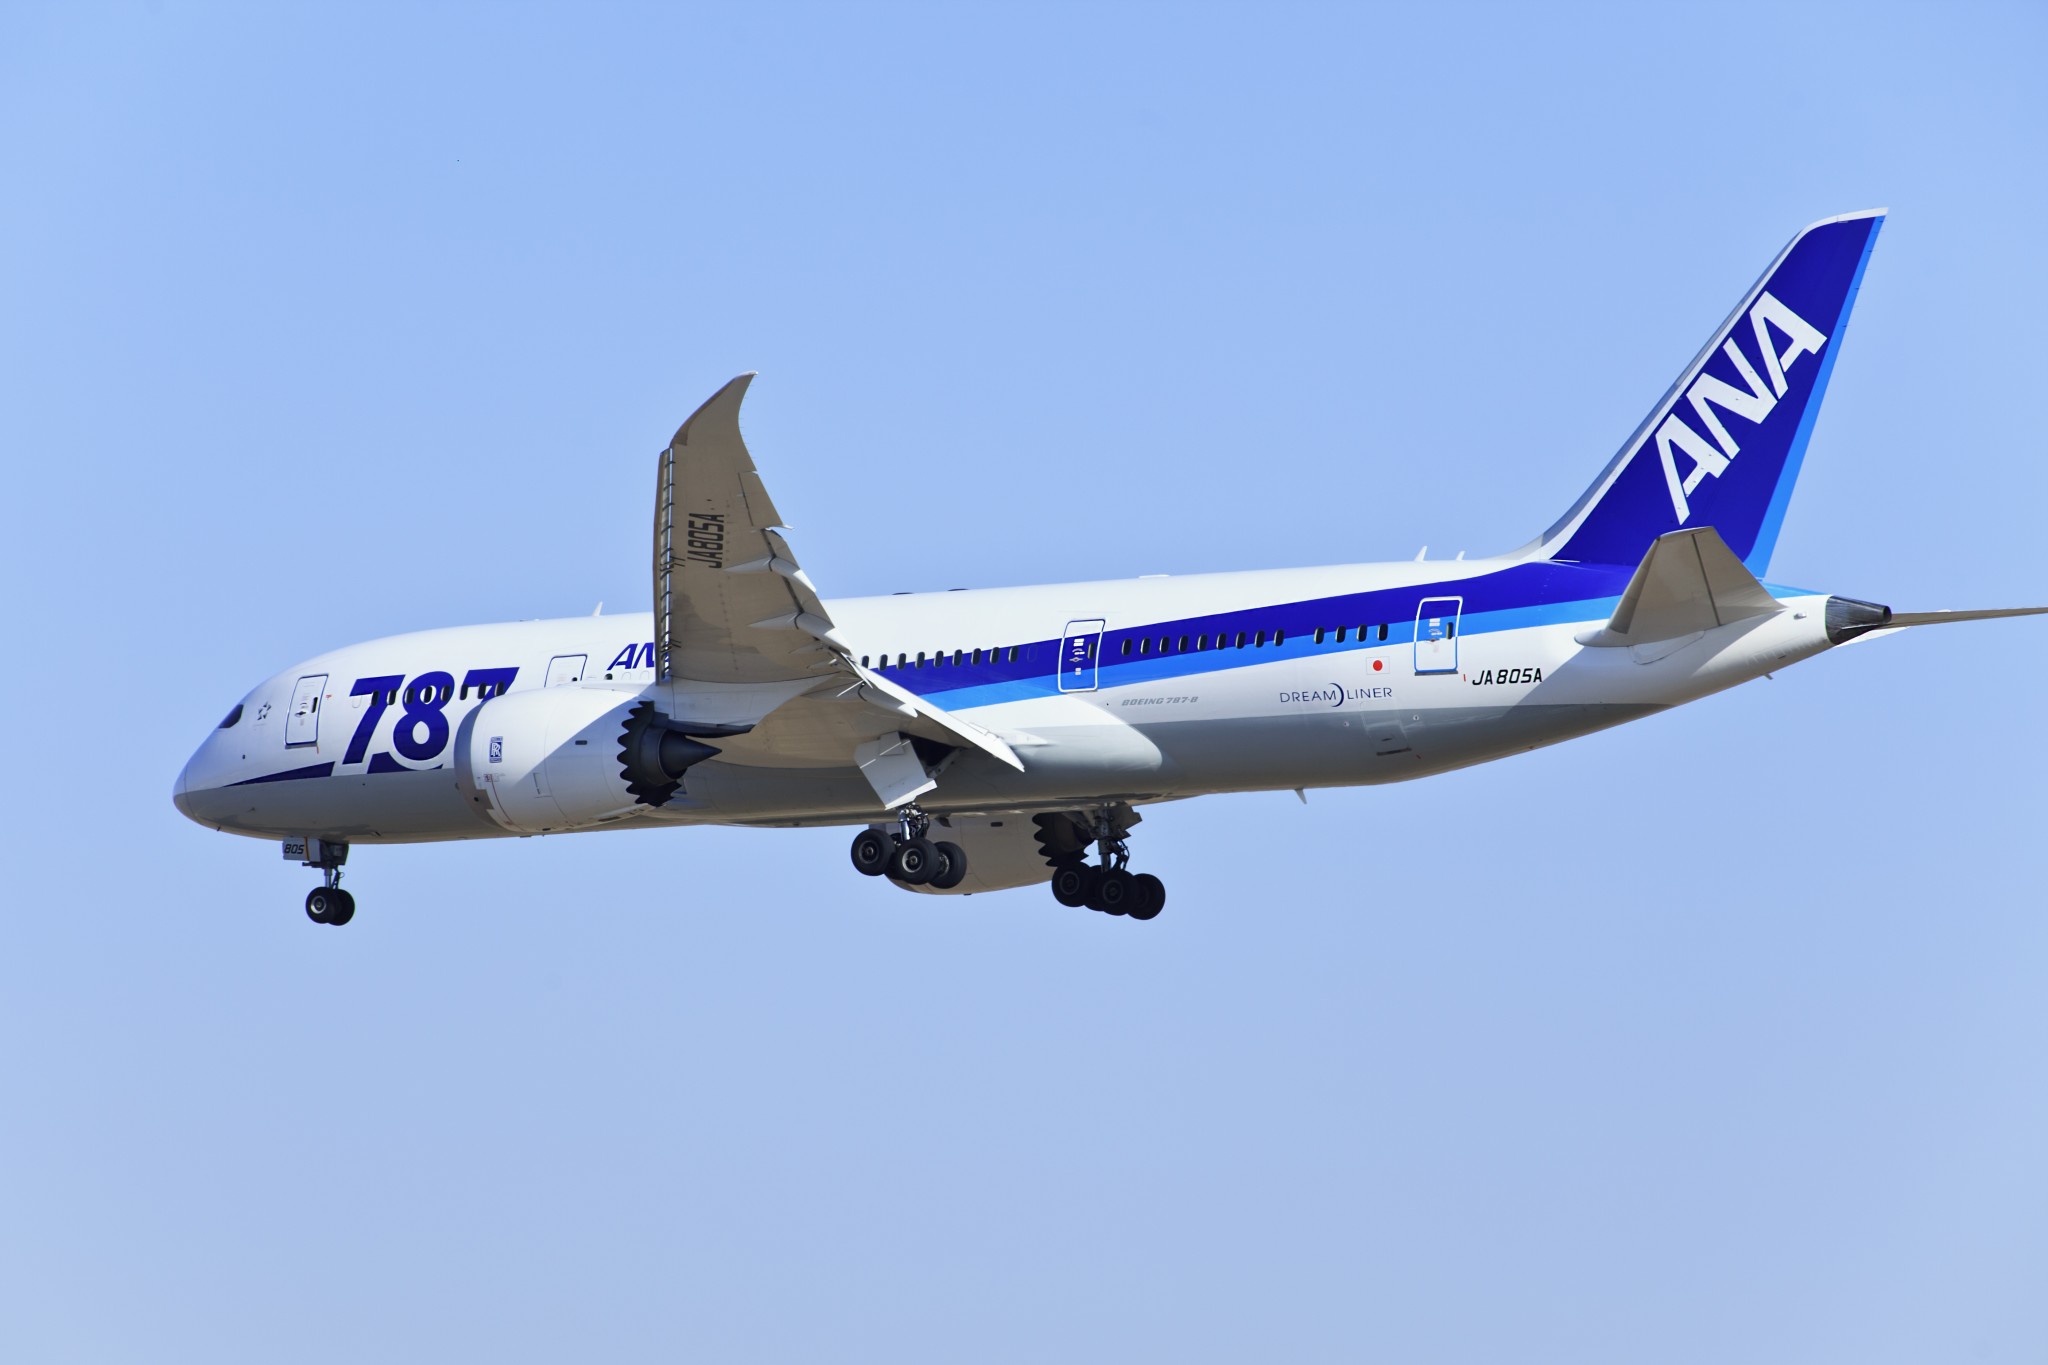 L3Harris Technologies to provide pilot training to All Nippon Airways